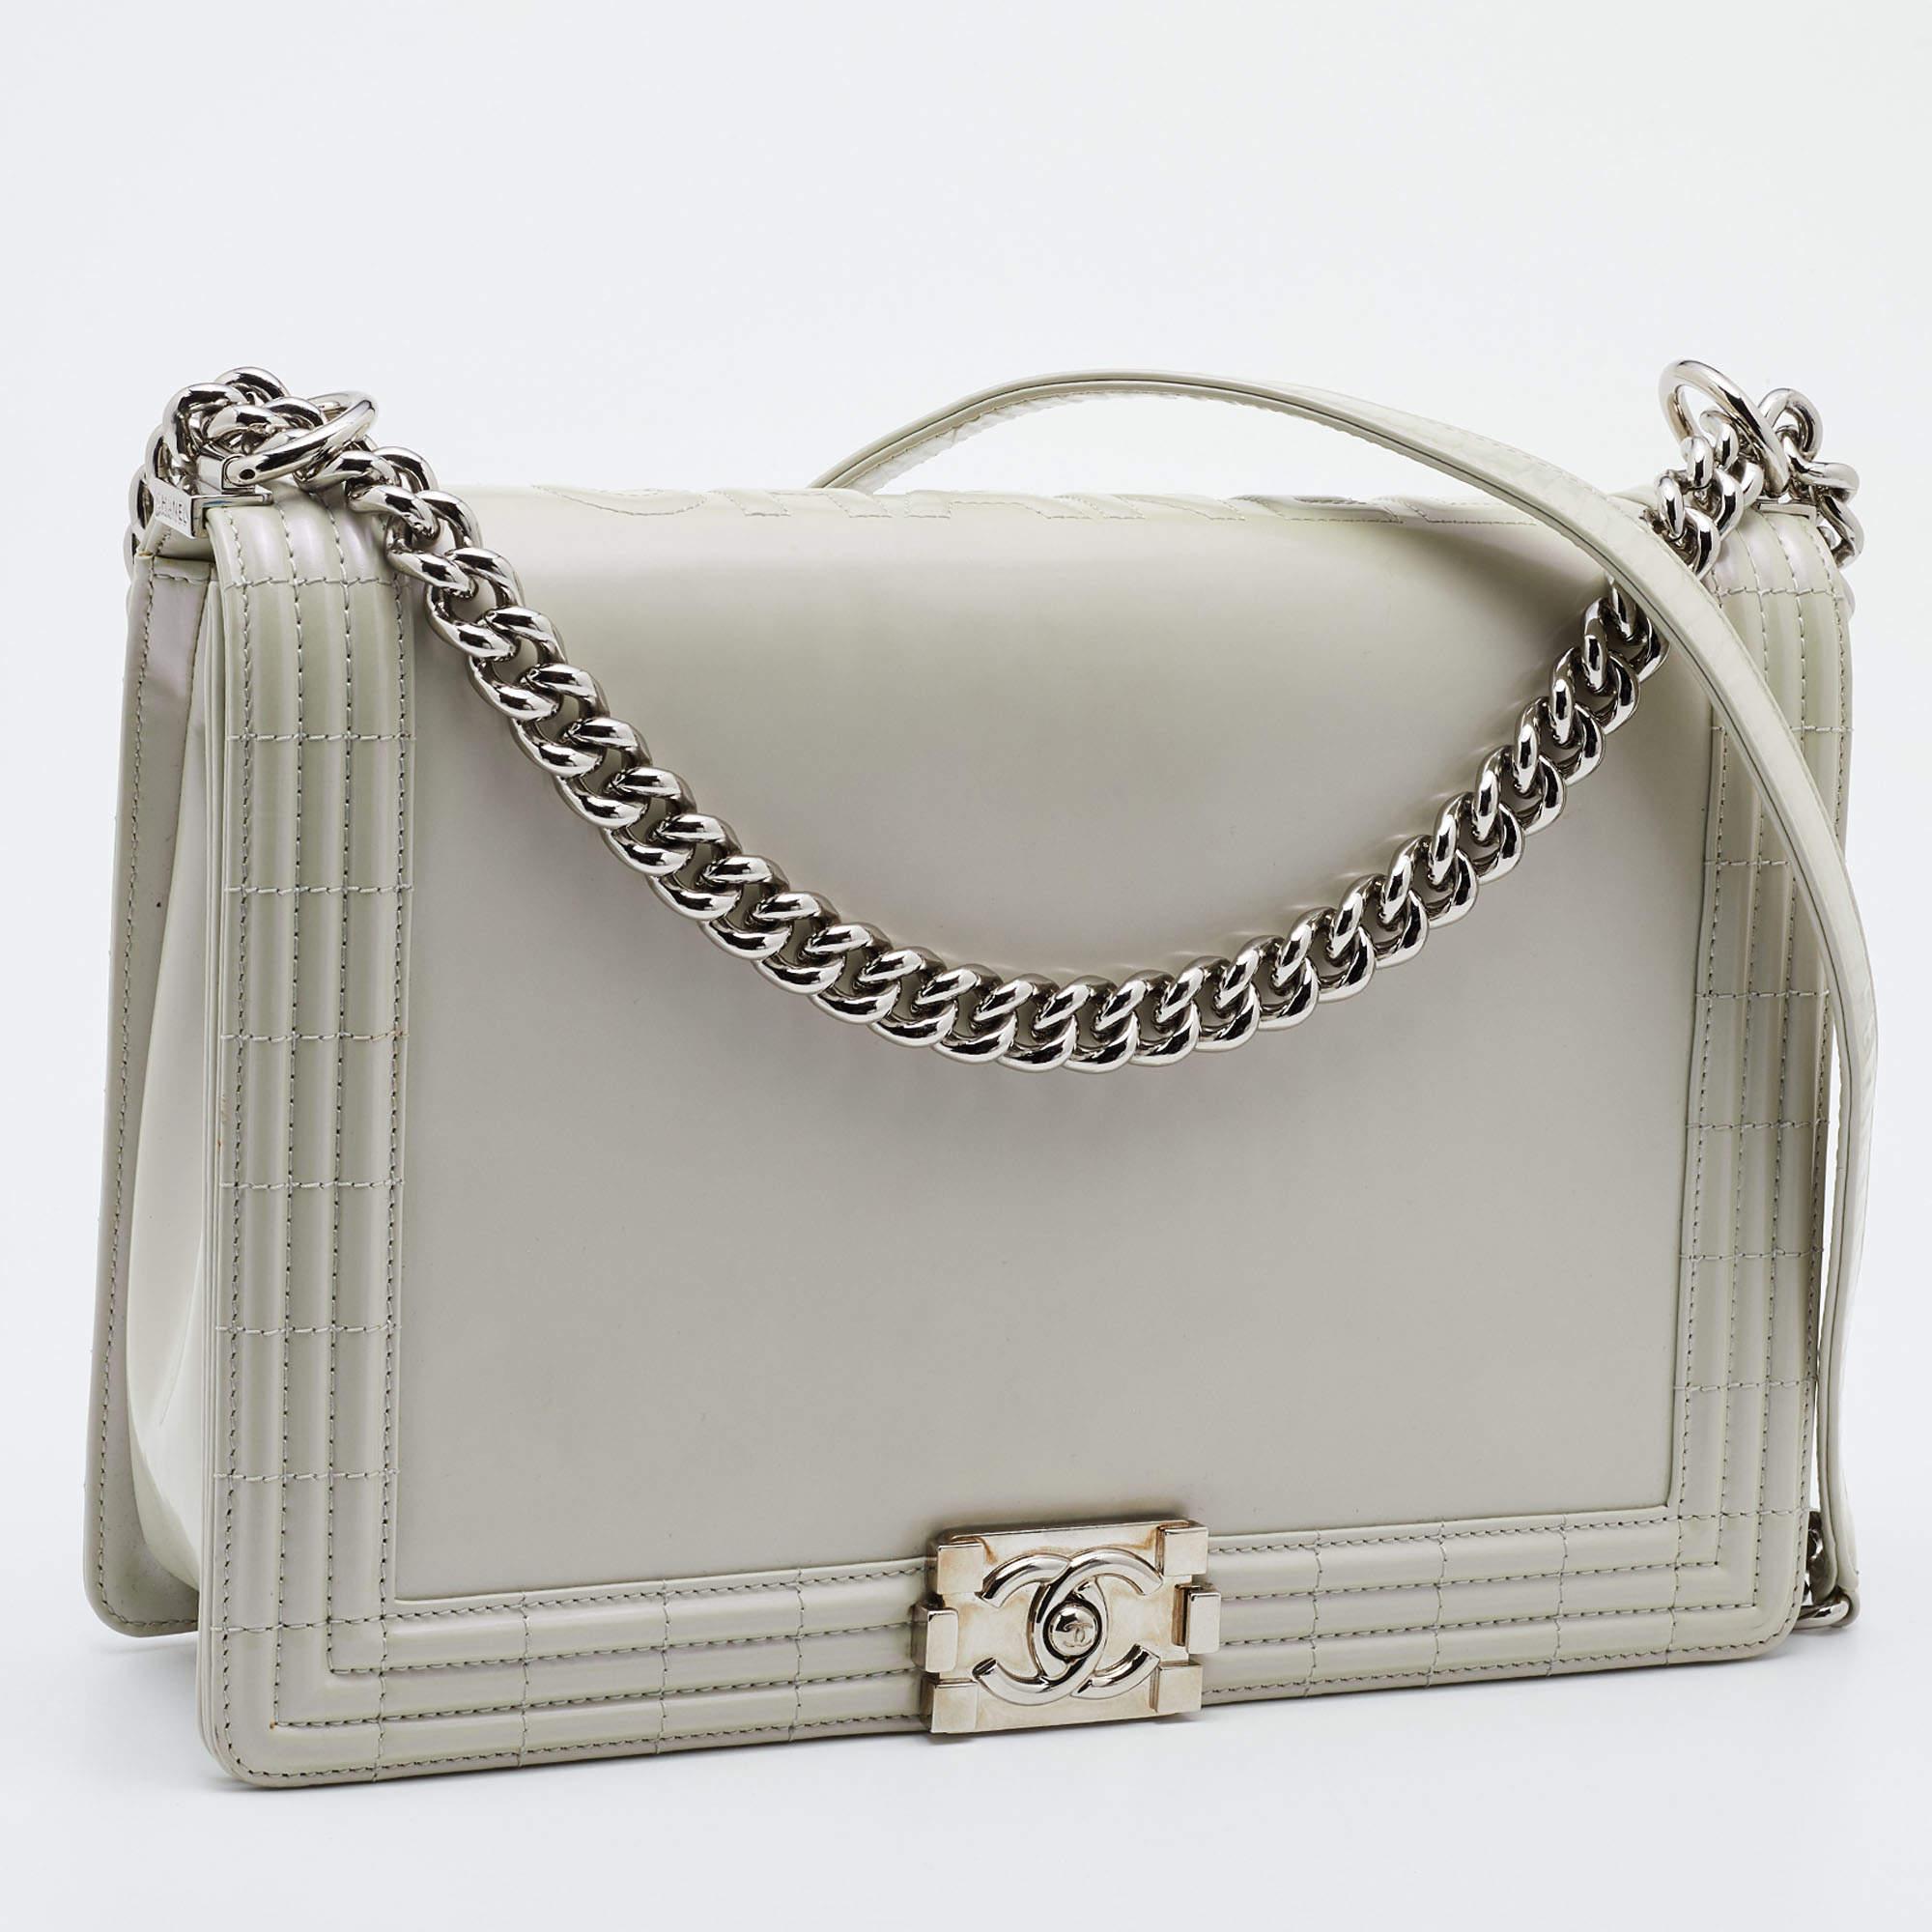 Women's Chanel Pearl Iridescent Glazed Leather Large Reverso Boy Flap Bag